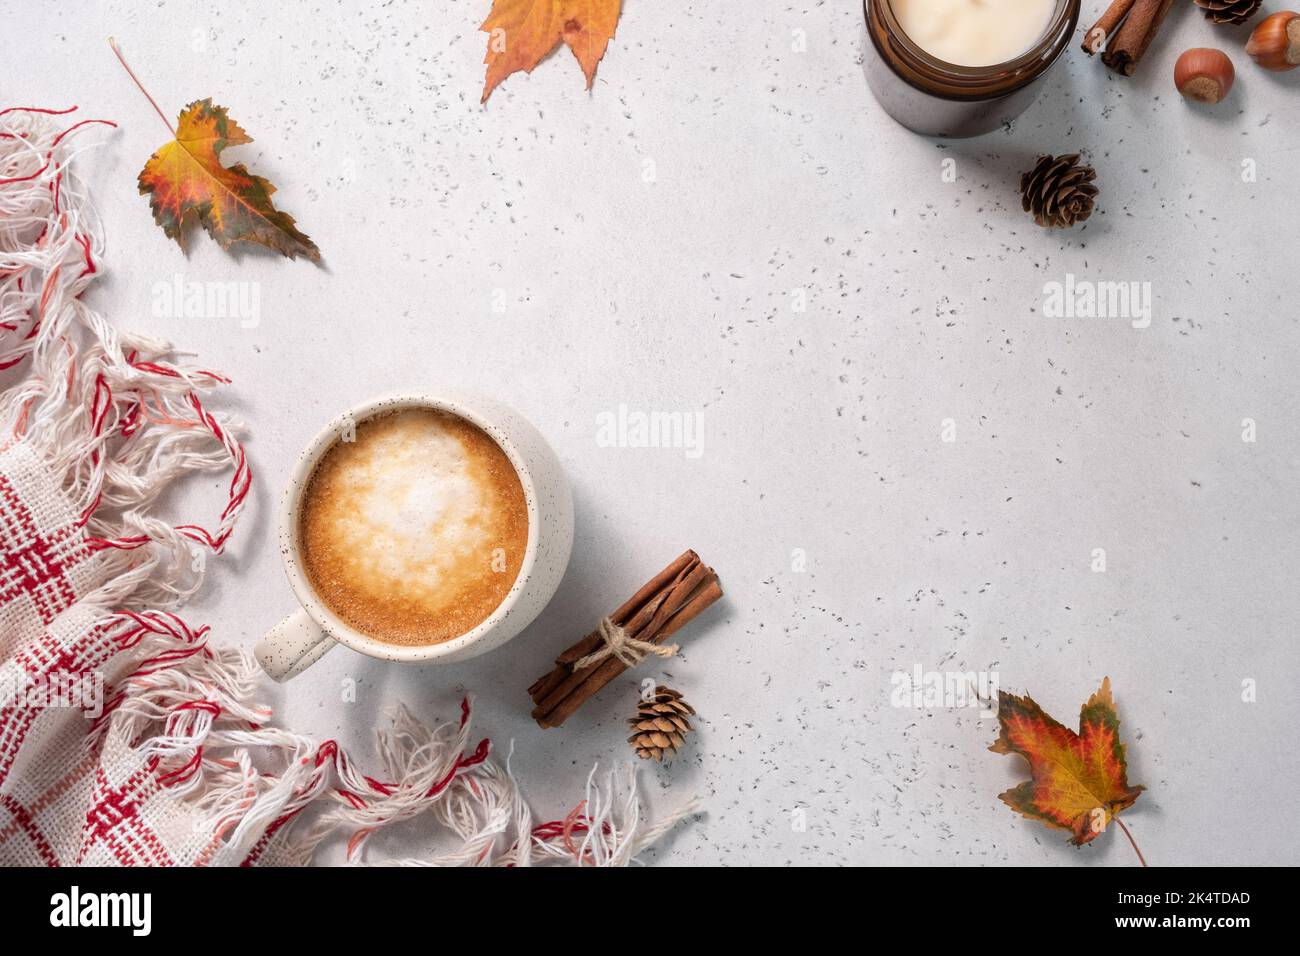 Autumn composition. Cup of coffee, blanket, autumn leaves, cinnamon sticks on white background. Stock Photo